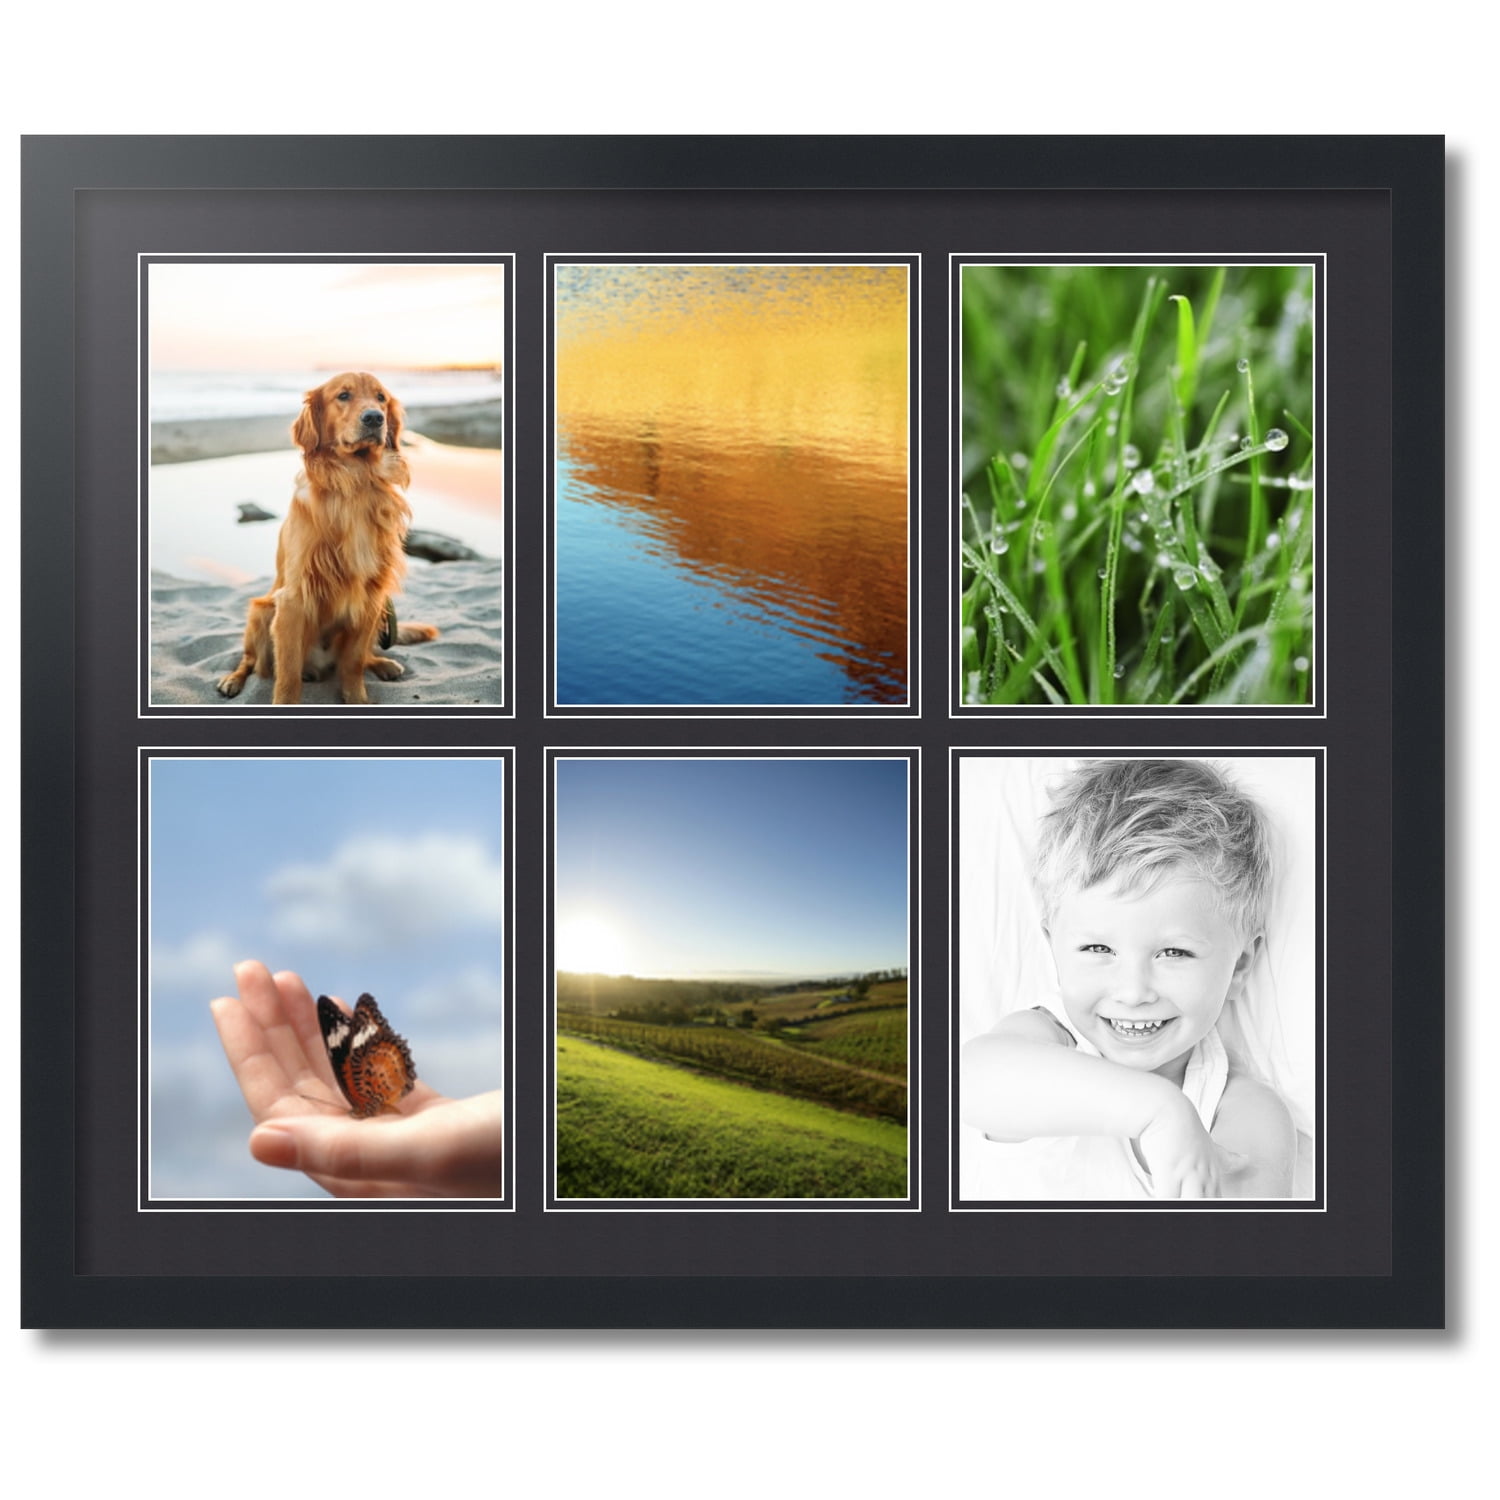 ArtToFrames Collage Photo Frame Double Mat with 1-13x17 Openings with Satin Black Frame and Silverpine mat. 